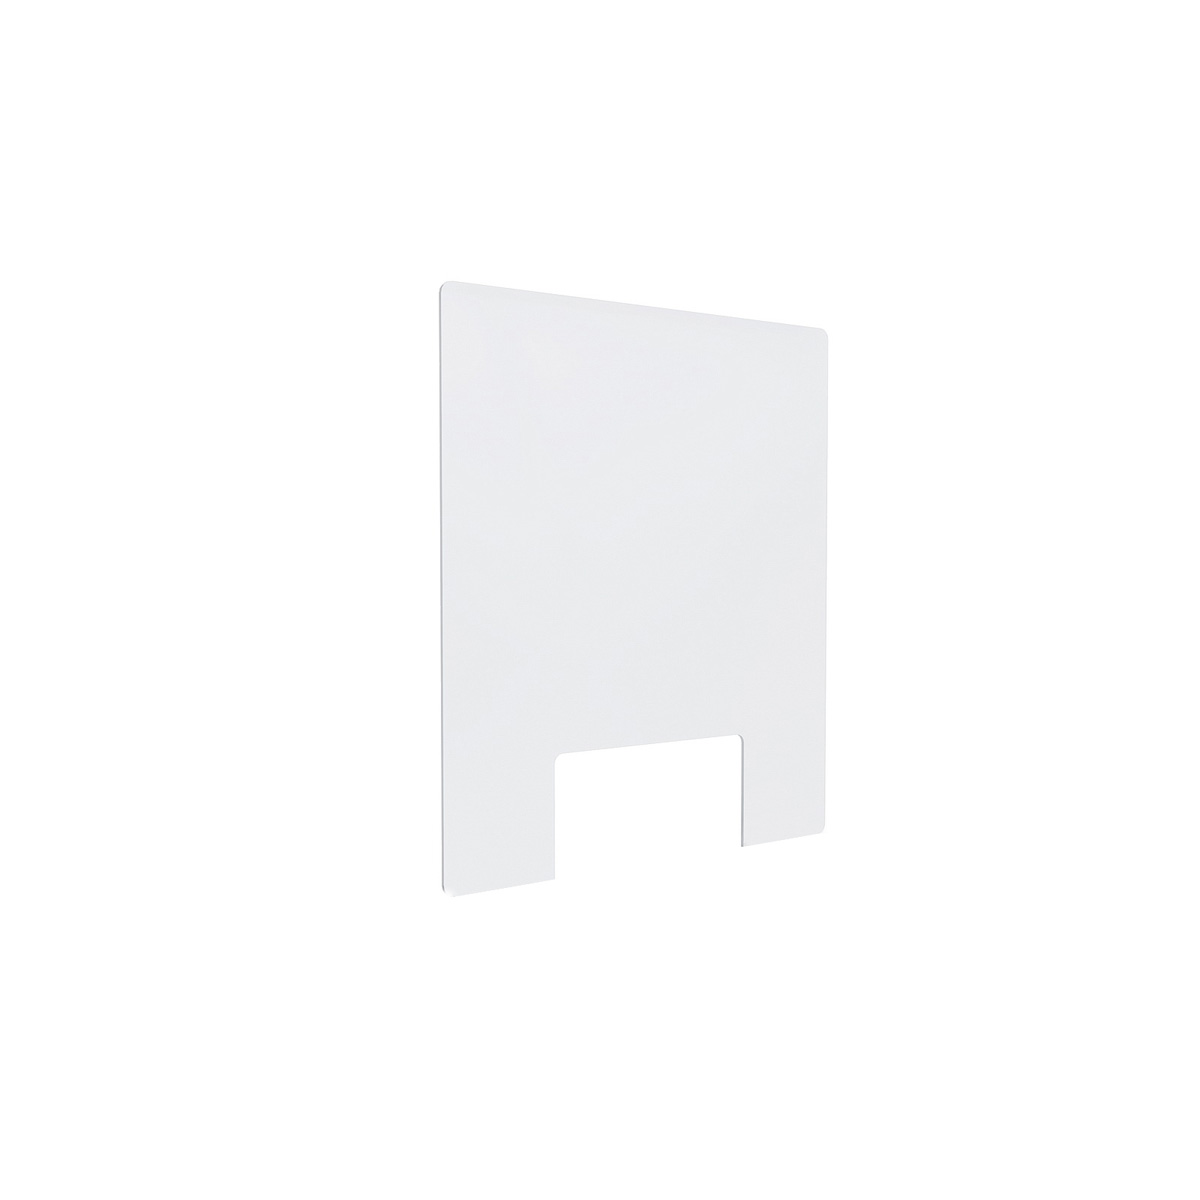 Clear Acrylic Sneeze Guard 20'' Wide x 23-1/2'' Tall (10'' x 5'' Cut Out) x 0.157'' Thickness